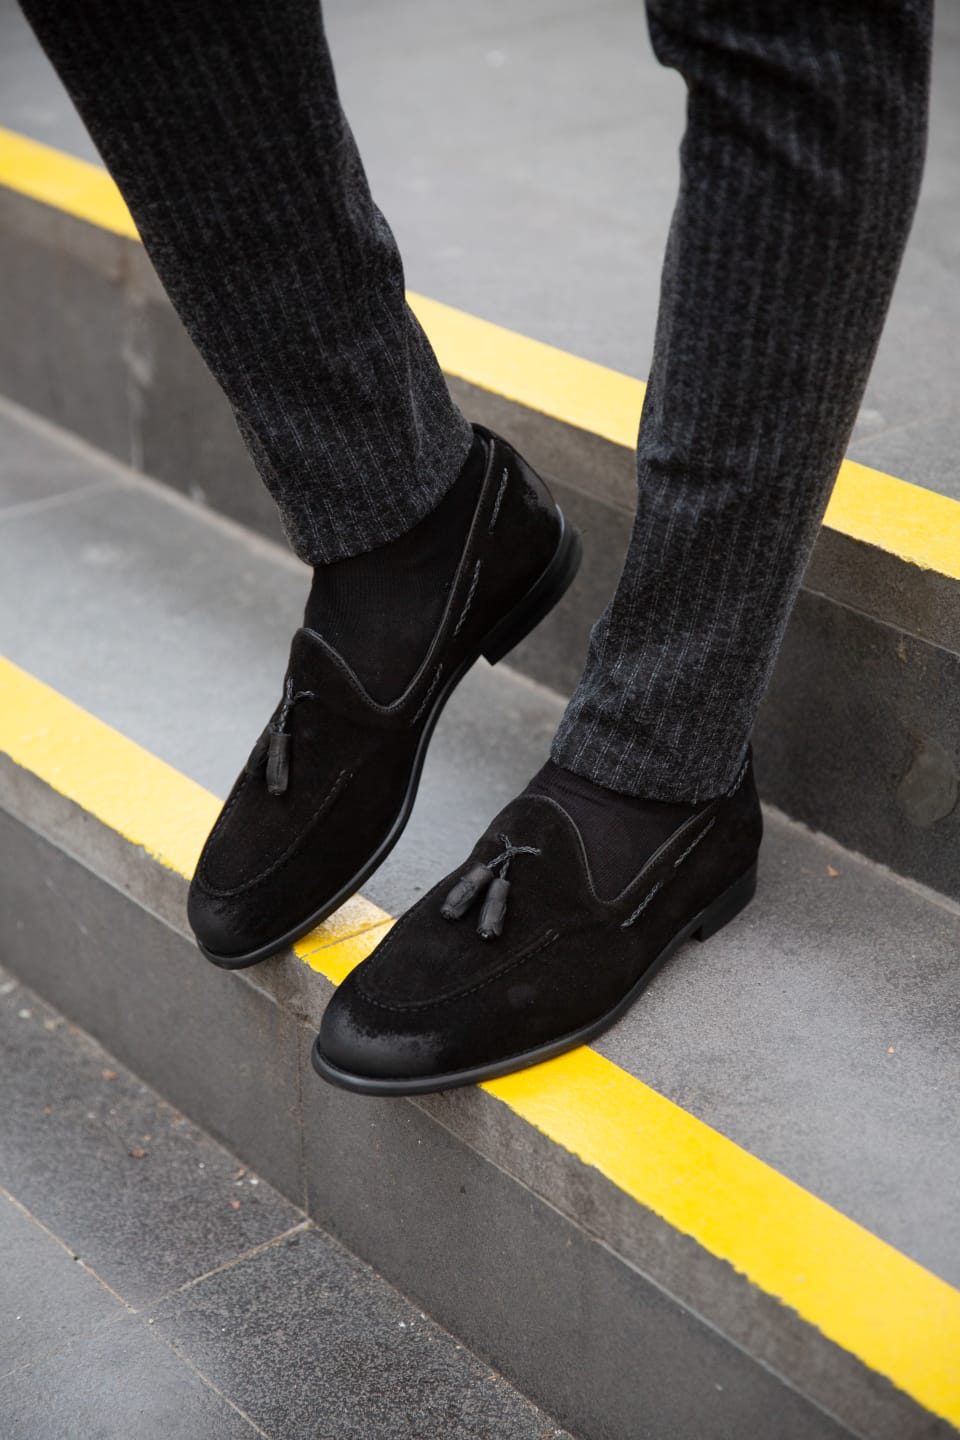 Special Edition MenStyleWith Suede Black Loafers - MenStyleWith